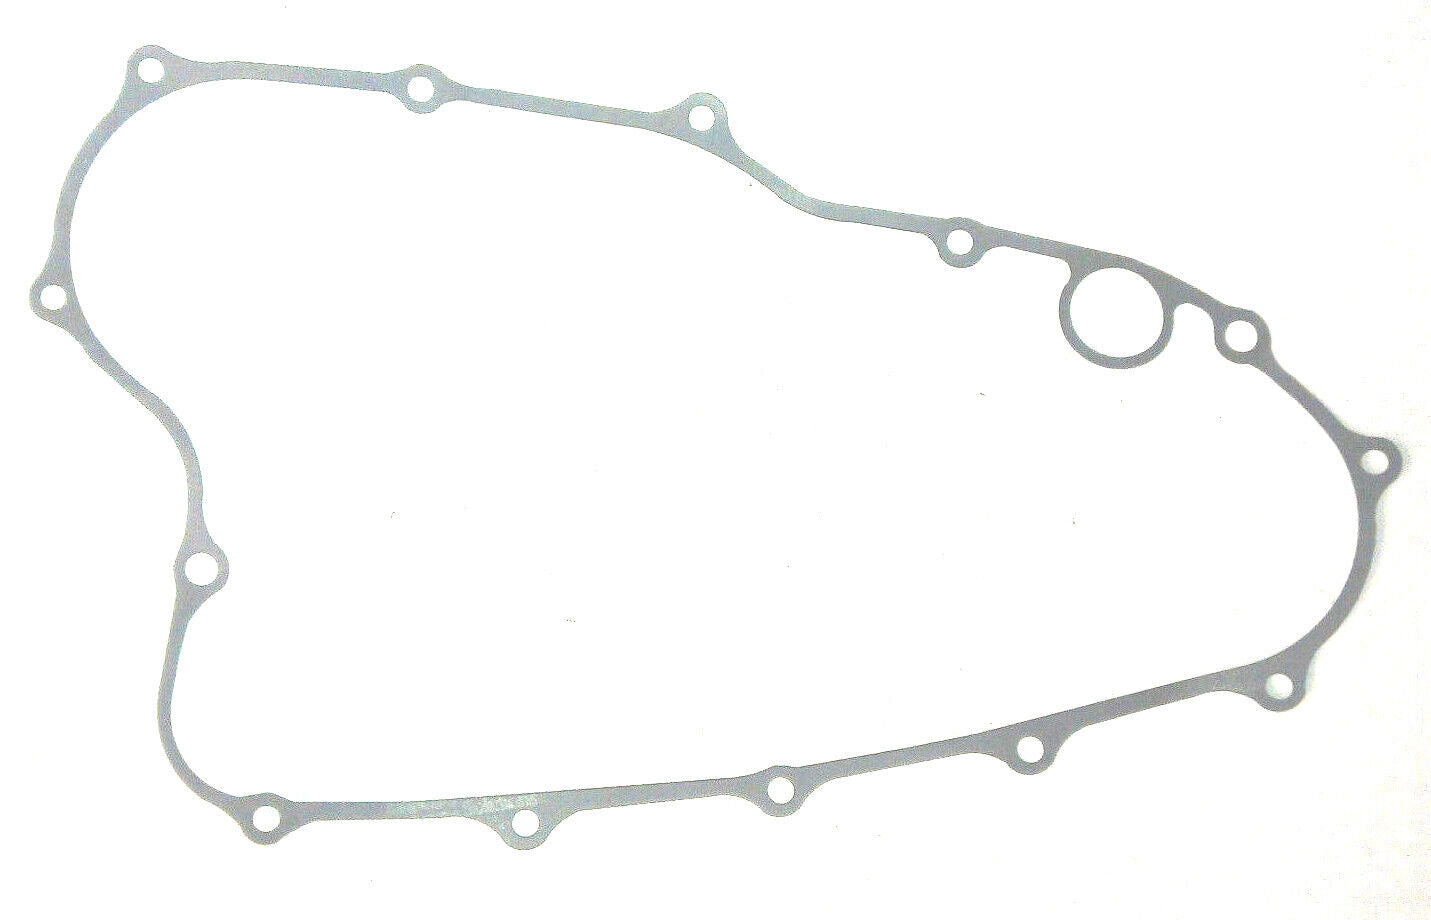 Honda CRF 450 R ( 2002 - 2008 ) RightHand Crankcase Main Clutch Cover Gasket